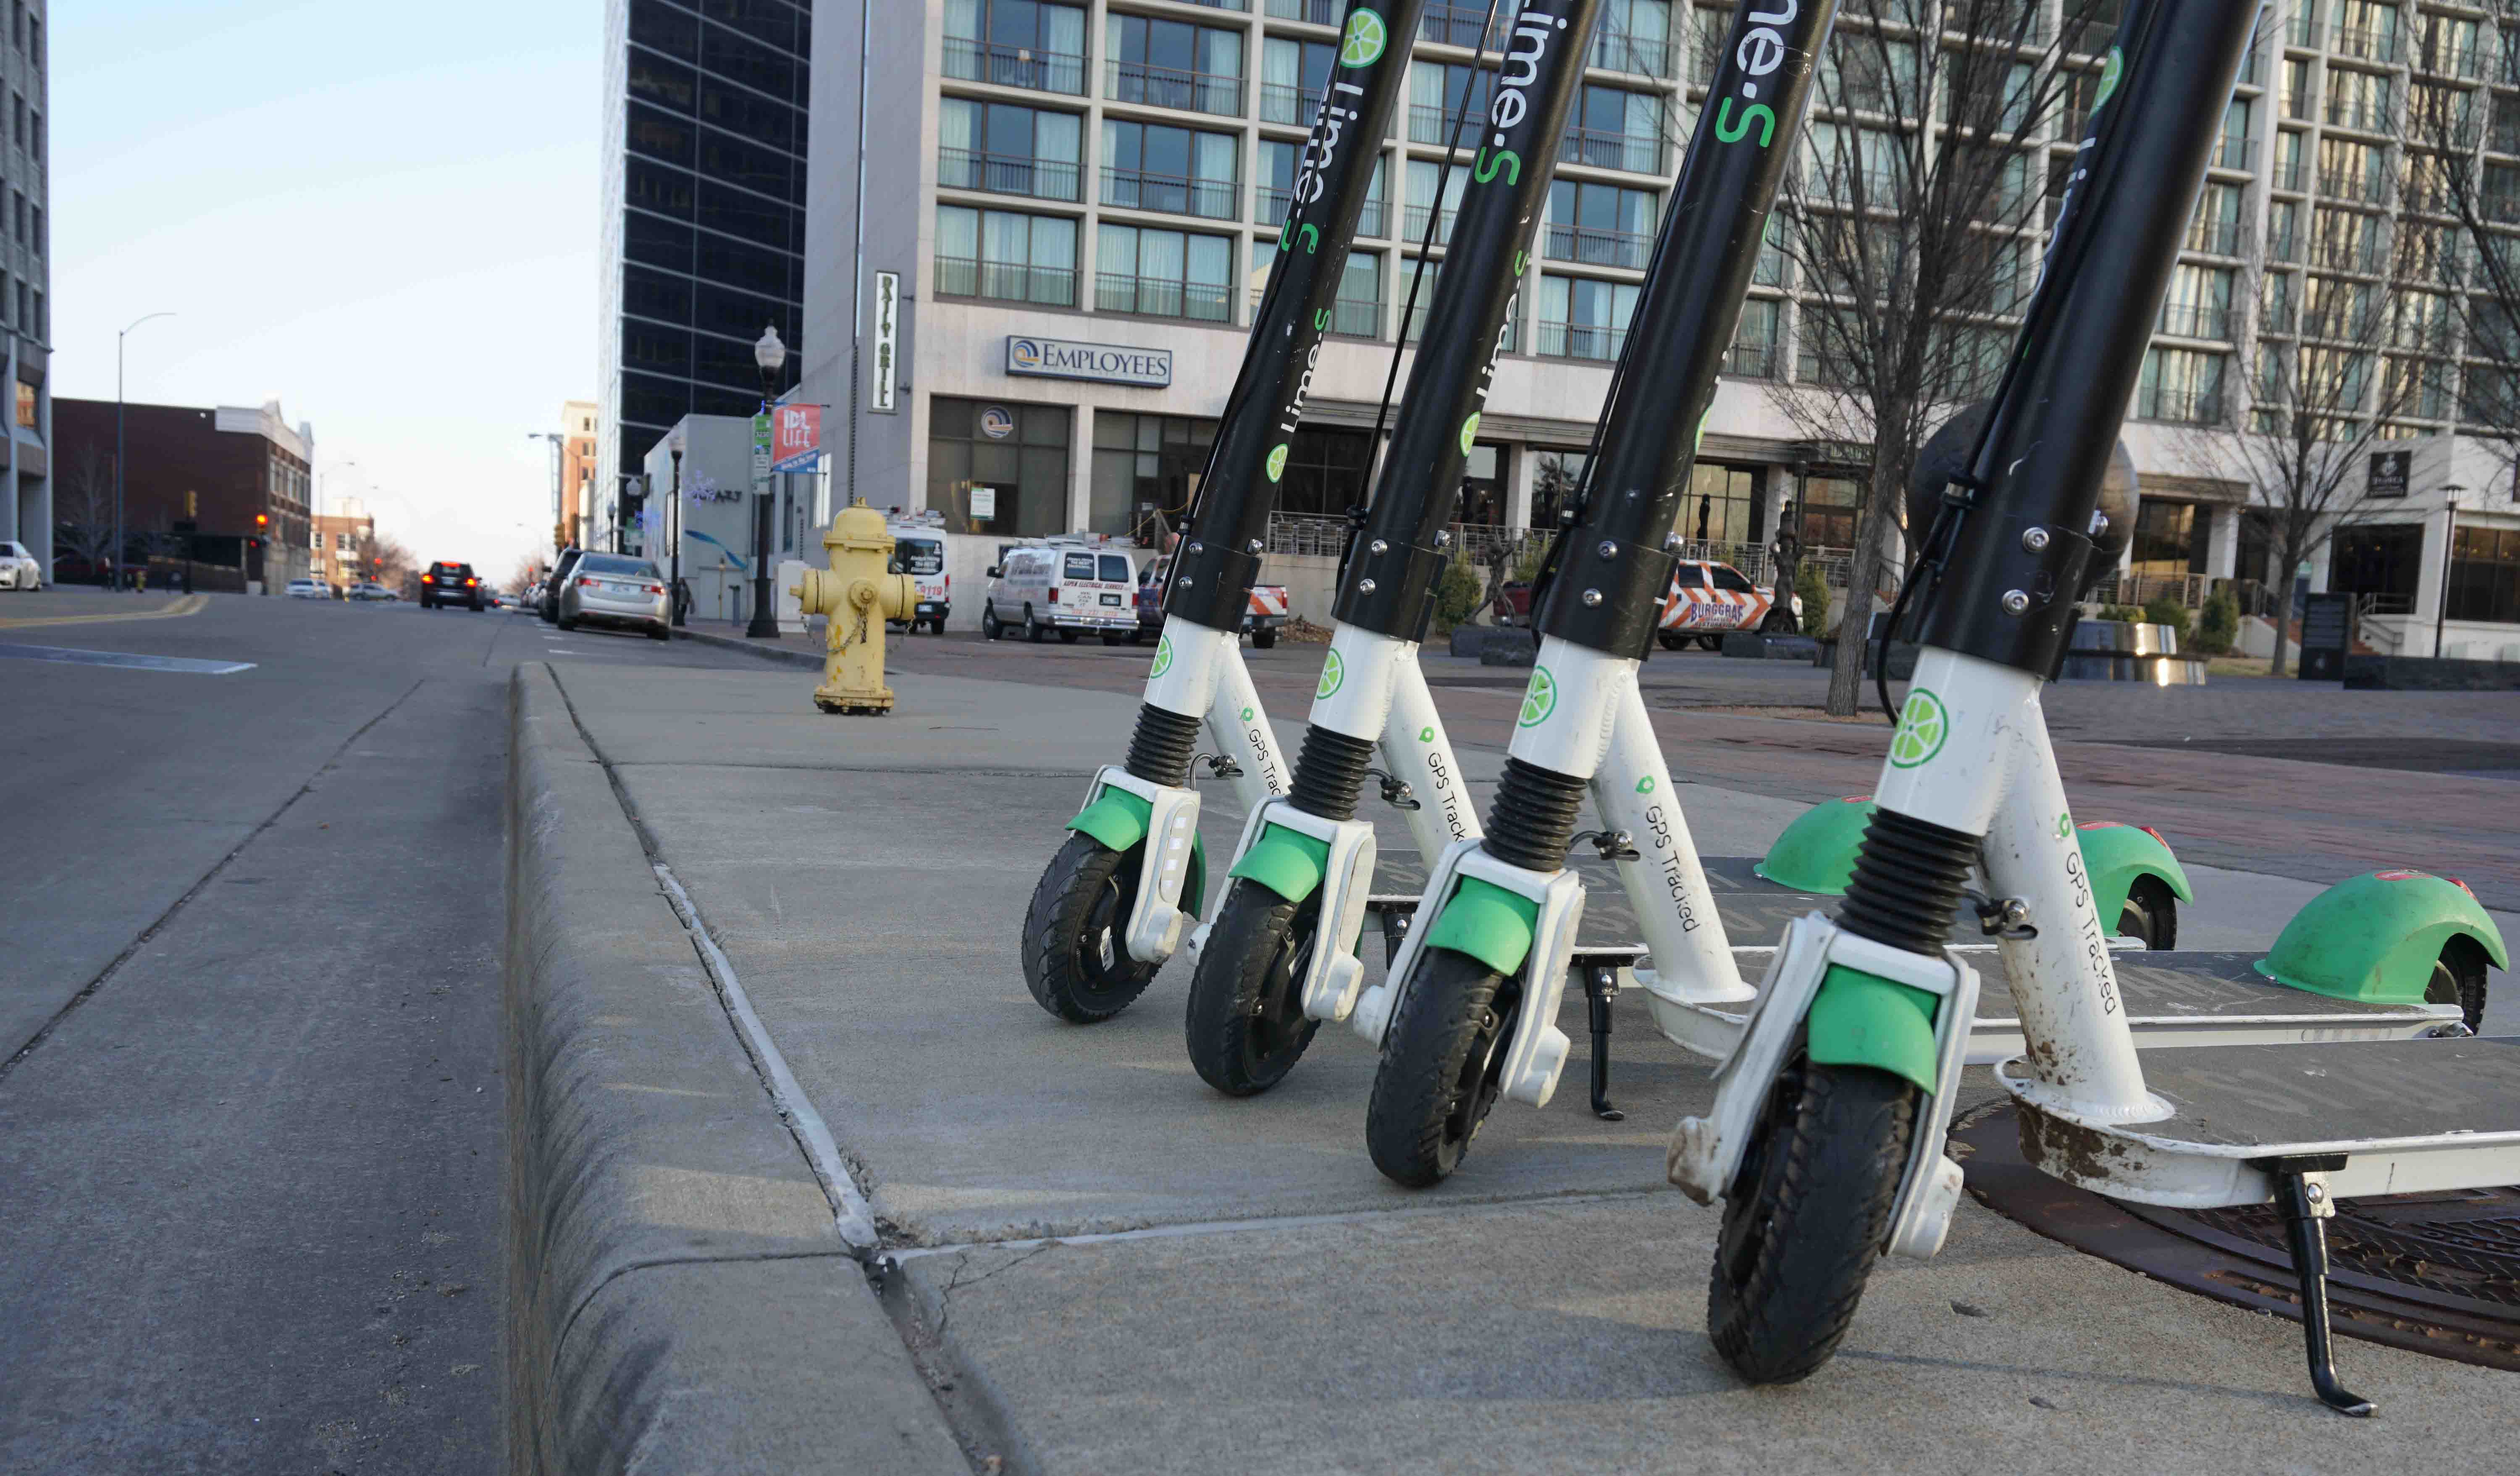 Downtown Columbus, Ohio: A case study in the mobility revolution